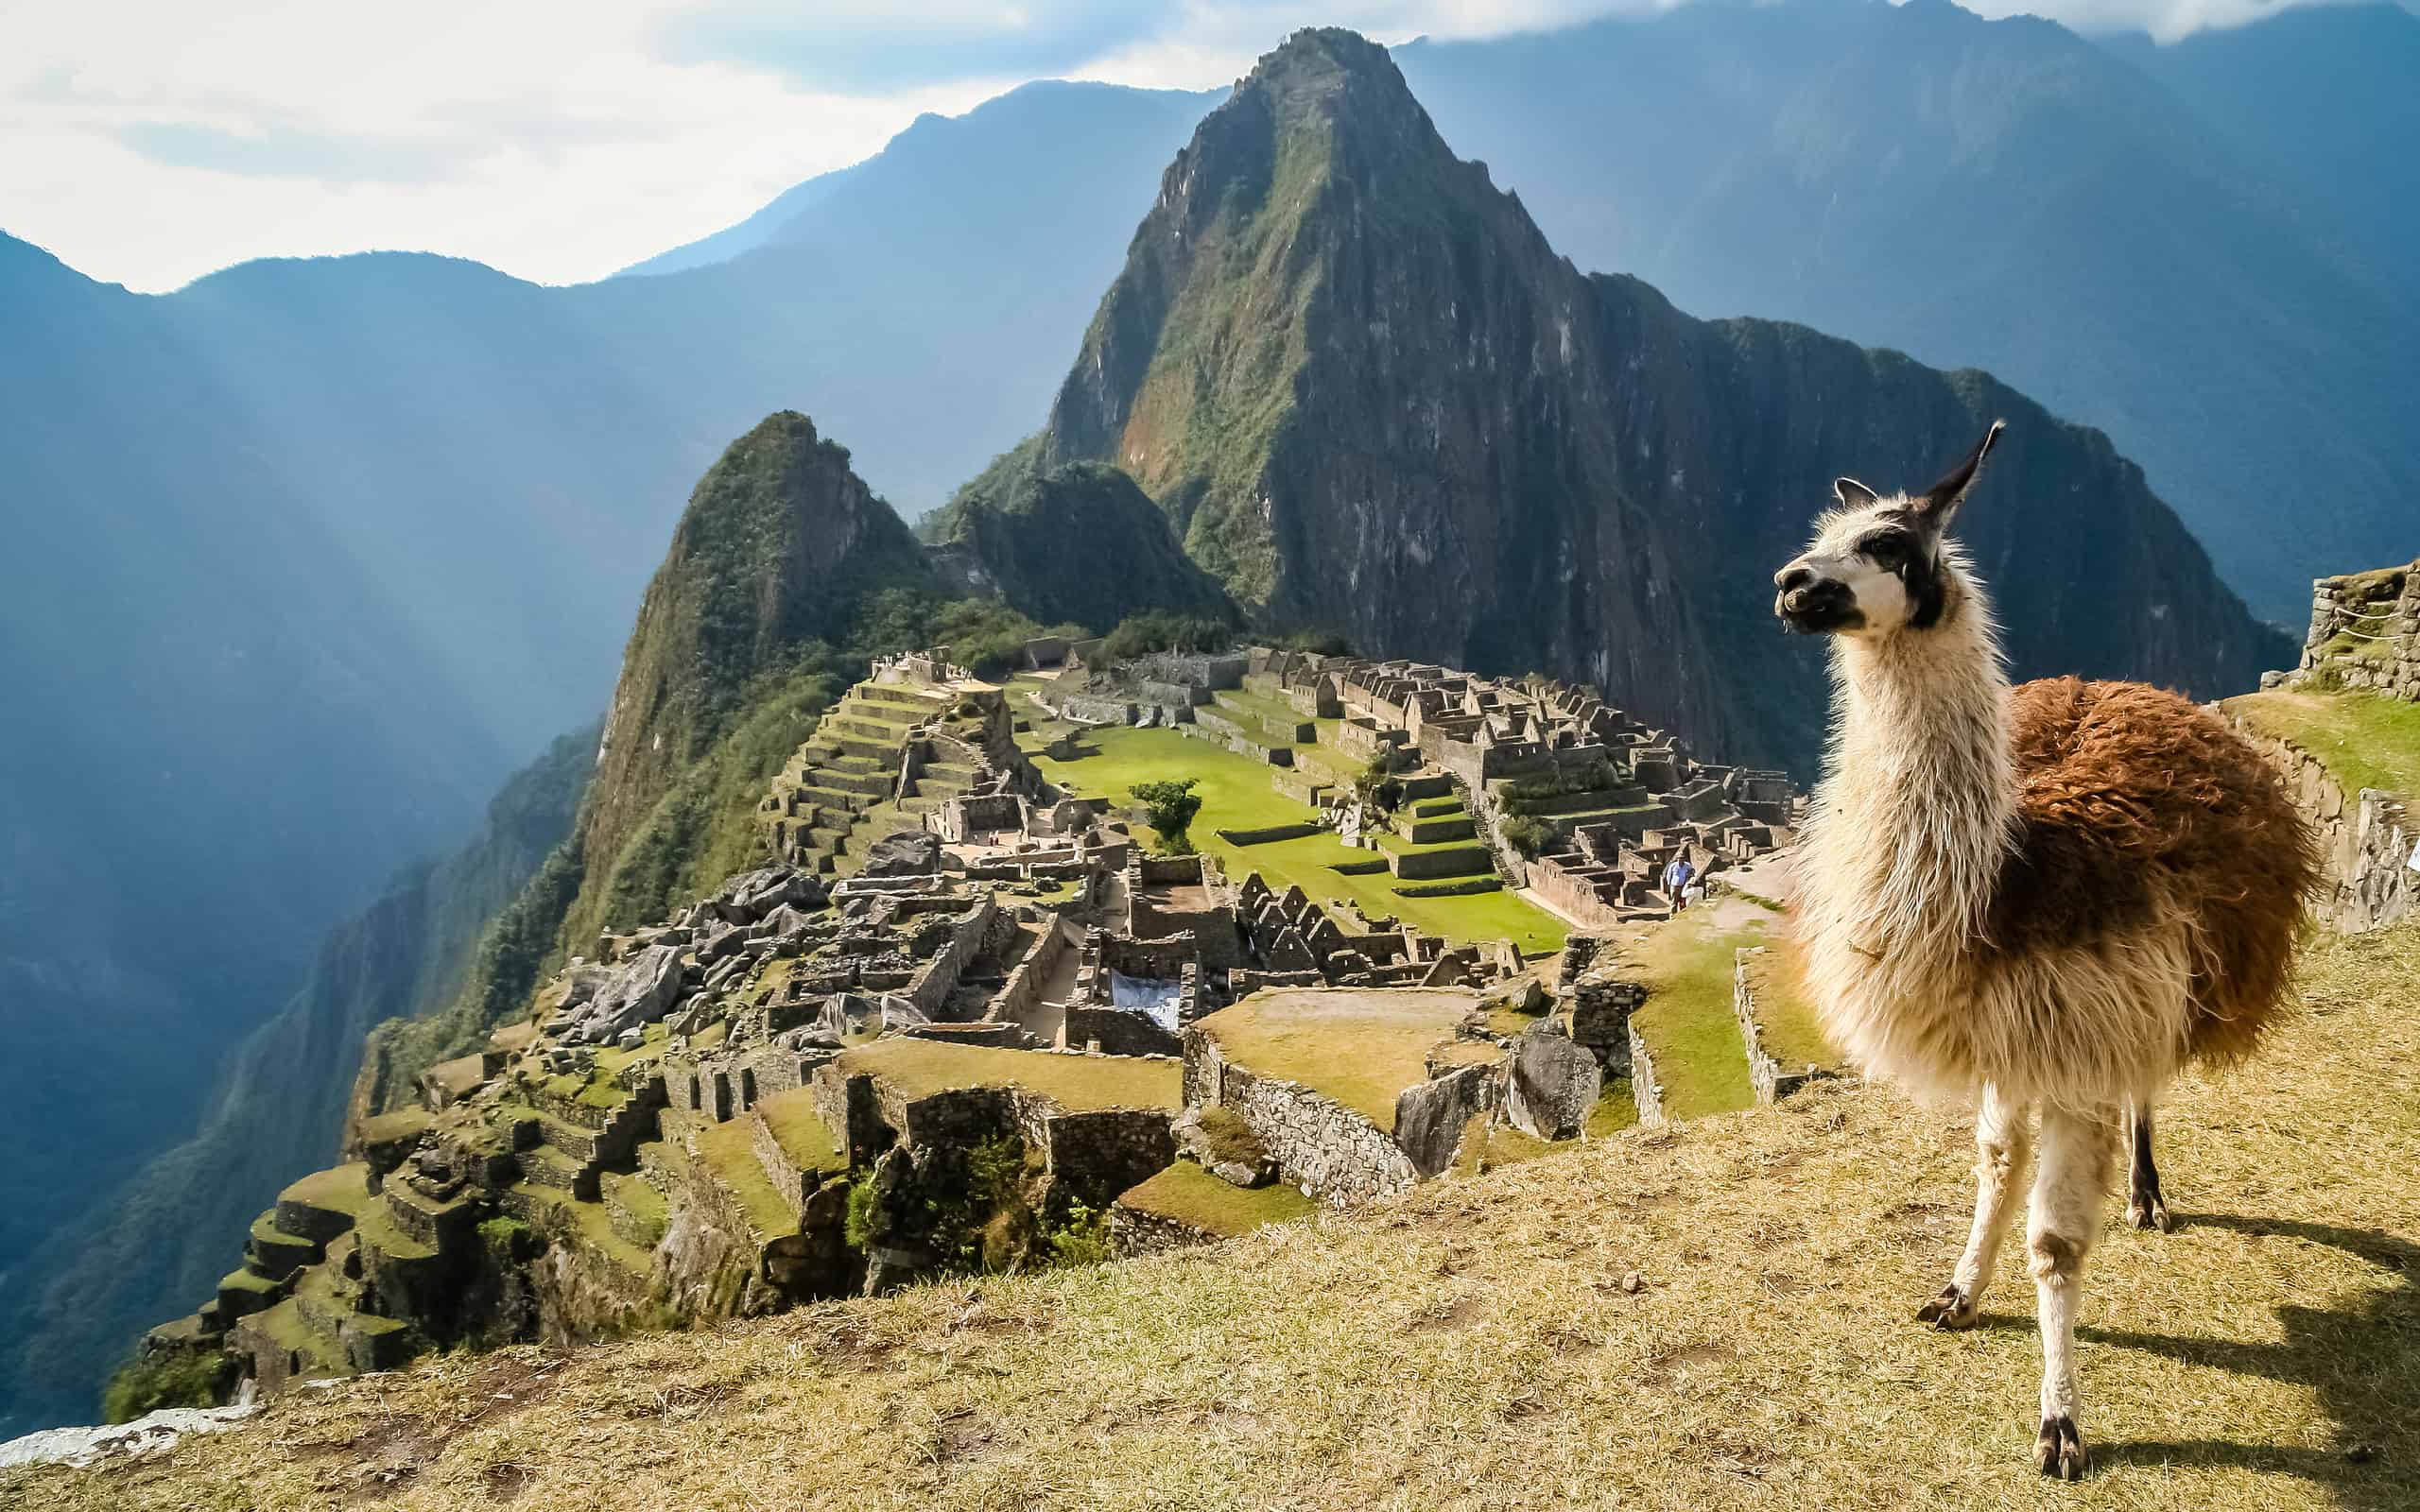 <p>15th-century <a href="https://a-z-animals.com/blog/discover-how-and-when-machu-picchu-was-built/?utm_campaign=msn&utm_source=msn_slideshow&utm_content=1325965&utm_medium=in_content">Machu Picchu</a> sits between the <a href="https://a-z-animals.com/blog/all-about-the-amazon/?utm_campaign=msn&utm_source=msn_slideshow&utm_content=1325965&utm_medium=in_content">Amazon Basin</a> and the <a href="https://a-z-animals.com/blog/discover-how-and-when-the-andes-mountains-was-formed/?utm_campaign=msn&utm_source=msn_slideshow&utm_content=1325965&utm_medium=in_content">Peruvian Andes</a>. It's a ruined five-mile city divided into residential and farming areas. Around 200 structures still stand on the steep 7,970-foot mountainside ridge, and more than 3,000 steps connect the sections. One of Machu Picchu's most wondrous aspects is its water collection system that ensured this epic hillside spot flourished. These incredible ruins are called "The Lost City of the Incas", because the city was abandoned 100 years after its construction when <a href="https://a-z-animals.com/animals/location/europe/spain/?utm_campaign=msn&utm_source=msn_slideshow&utm_content=1325965&utm_medium=in_content">Spanish</a> conquistadors arrived. Machu Picchu is one of the most popular <a href="https://a-z-animals.com/animals/location/south-america/?utm_campaign=msn&utm_source=msn_slideshow&utm_content=1325965&utm_medium=in_content">South American</a> UNESCO sites in the world. Over a million tourists visit every year.</p><p>Sharks, lions, alligators, and more! Don’t miss today’s latest and most exciting animal news. <strong><a href="https://www.msn.com/en-us/channel/source/AZ%20Animals%20US/sr-vid-7etr9q8xun6k6508c3nufaum0de3dqktiq6h27ddeagnfug30wka">Click here to access the A-Z Animals profile page</a> and be sure to hit the <em>Follow</em> button here or at the top of this article!</strong></p> <p>Have feedback? Add a comment below!</p>